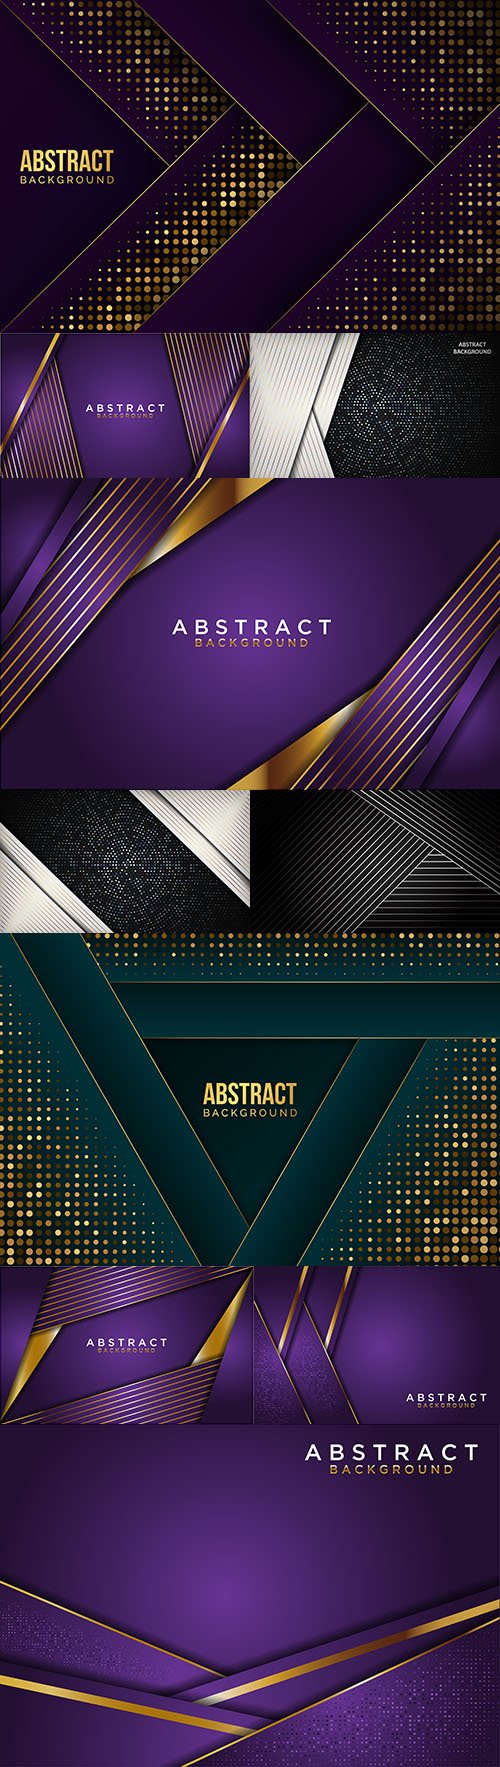 Abstract background and gold line design decorative element